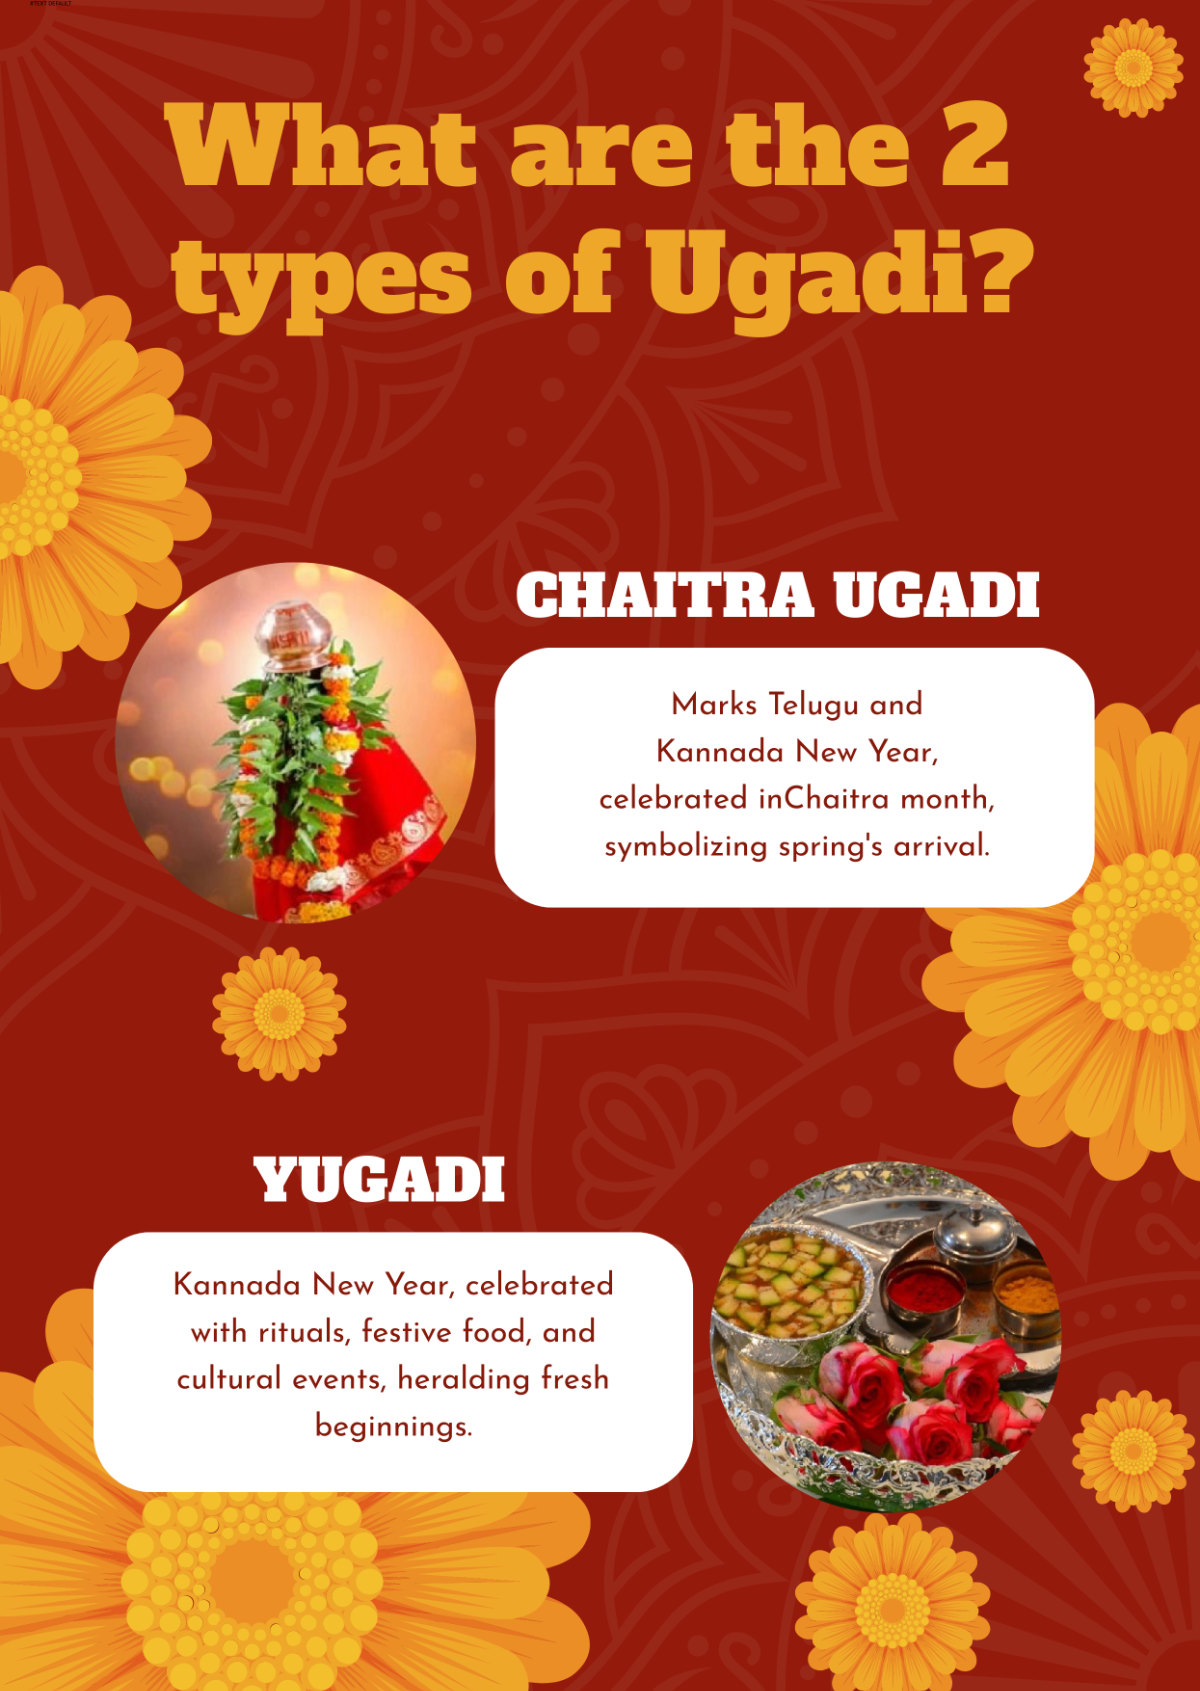 What are the 2 types of Ugadi?